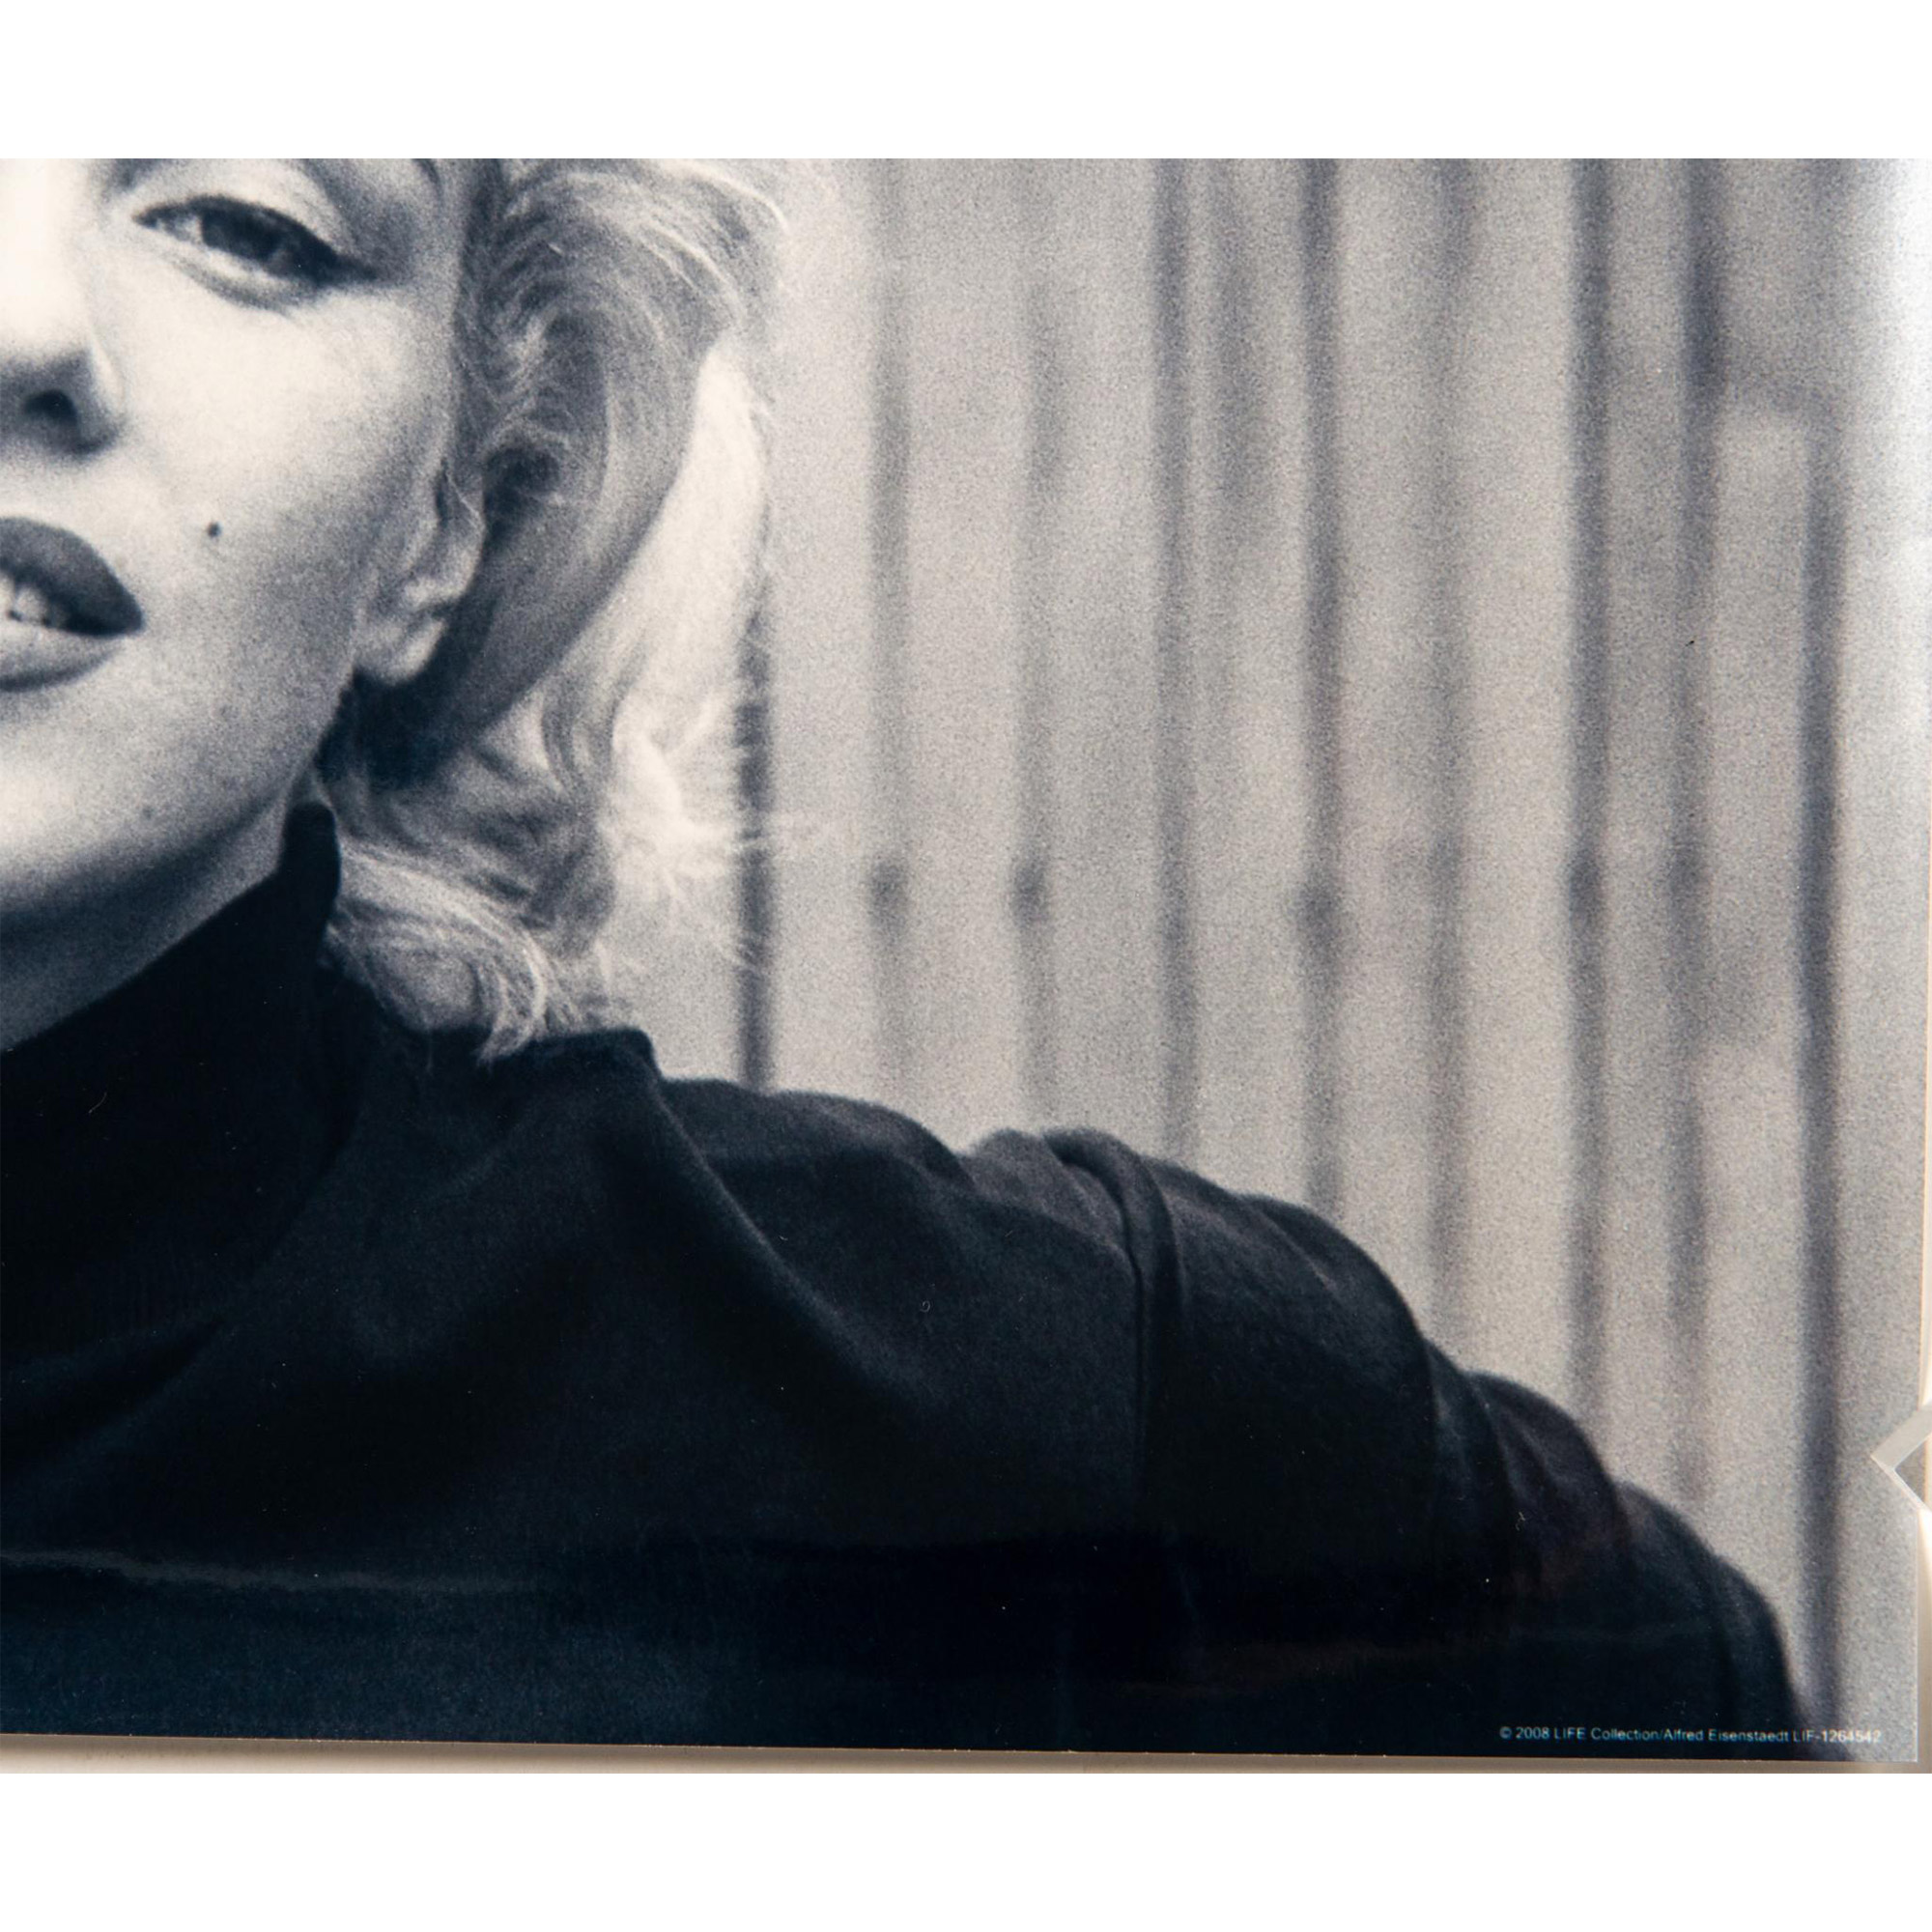 Photographic Poster Print, Marilyn Monroe at Home - Image 2 of 2